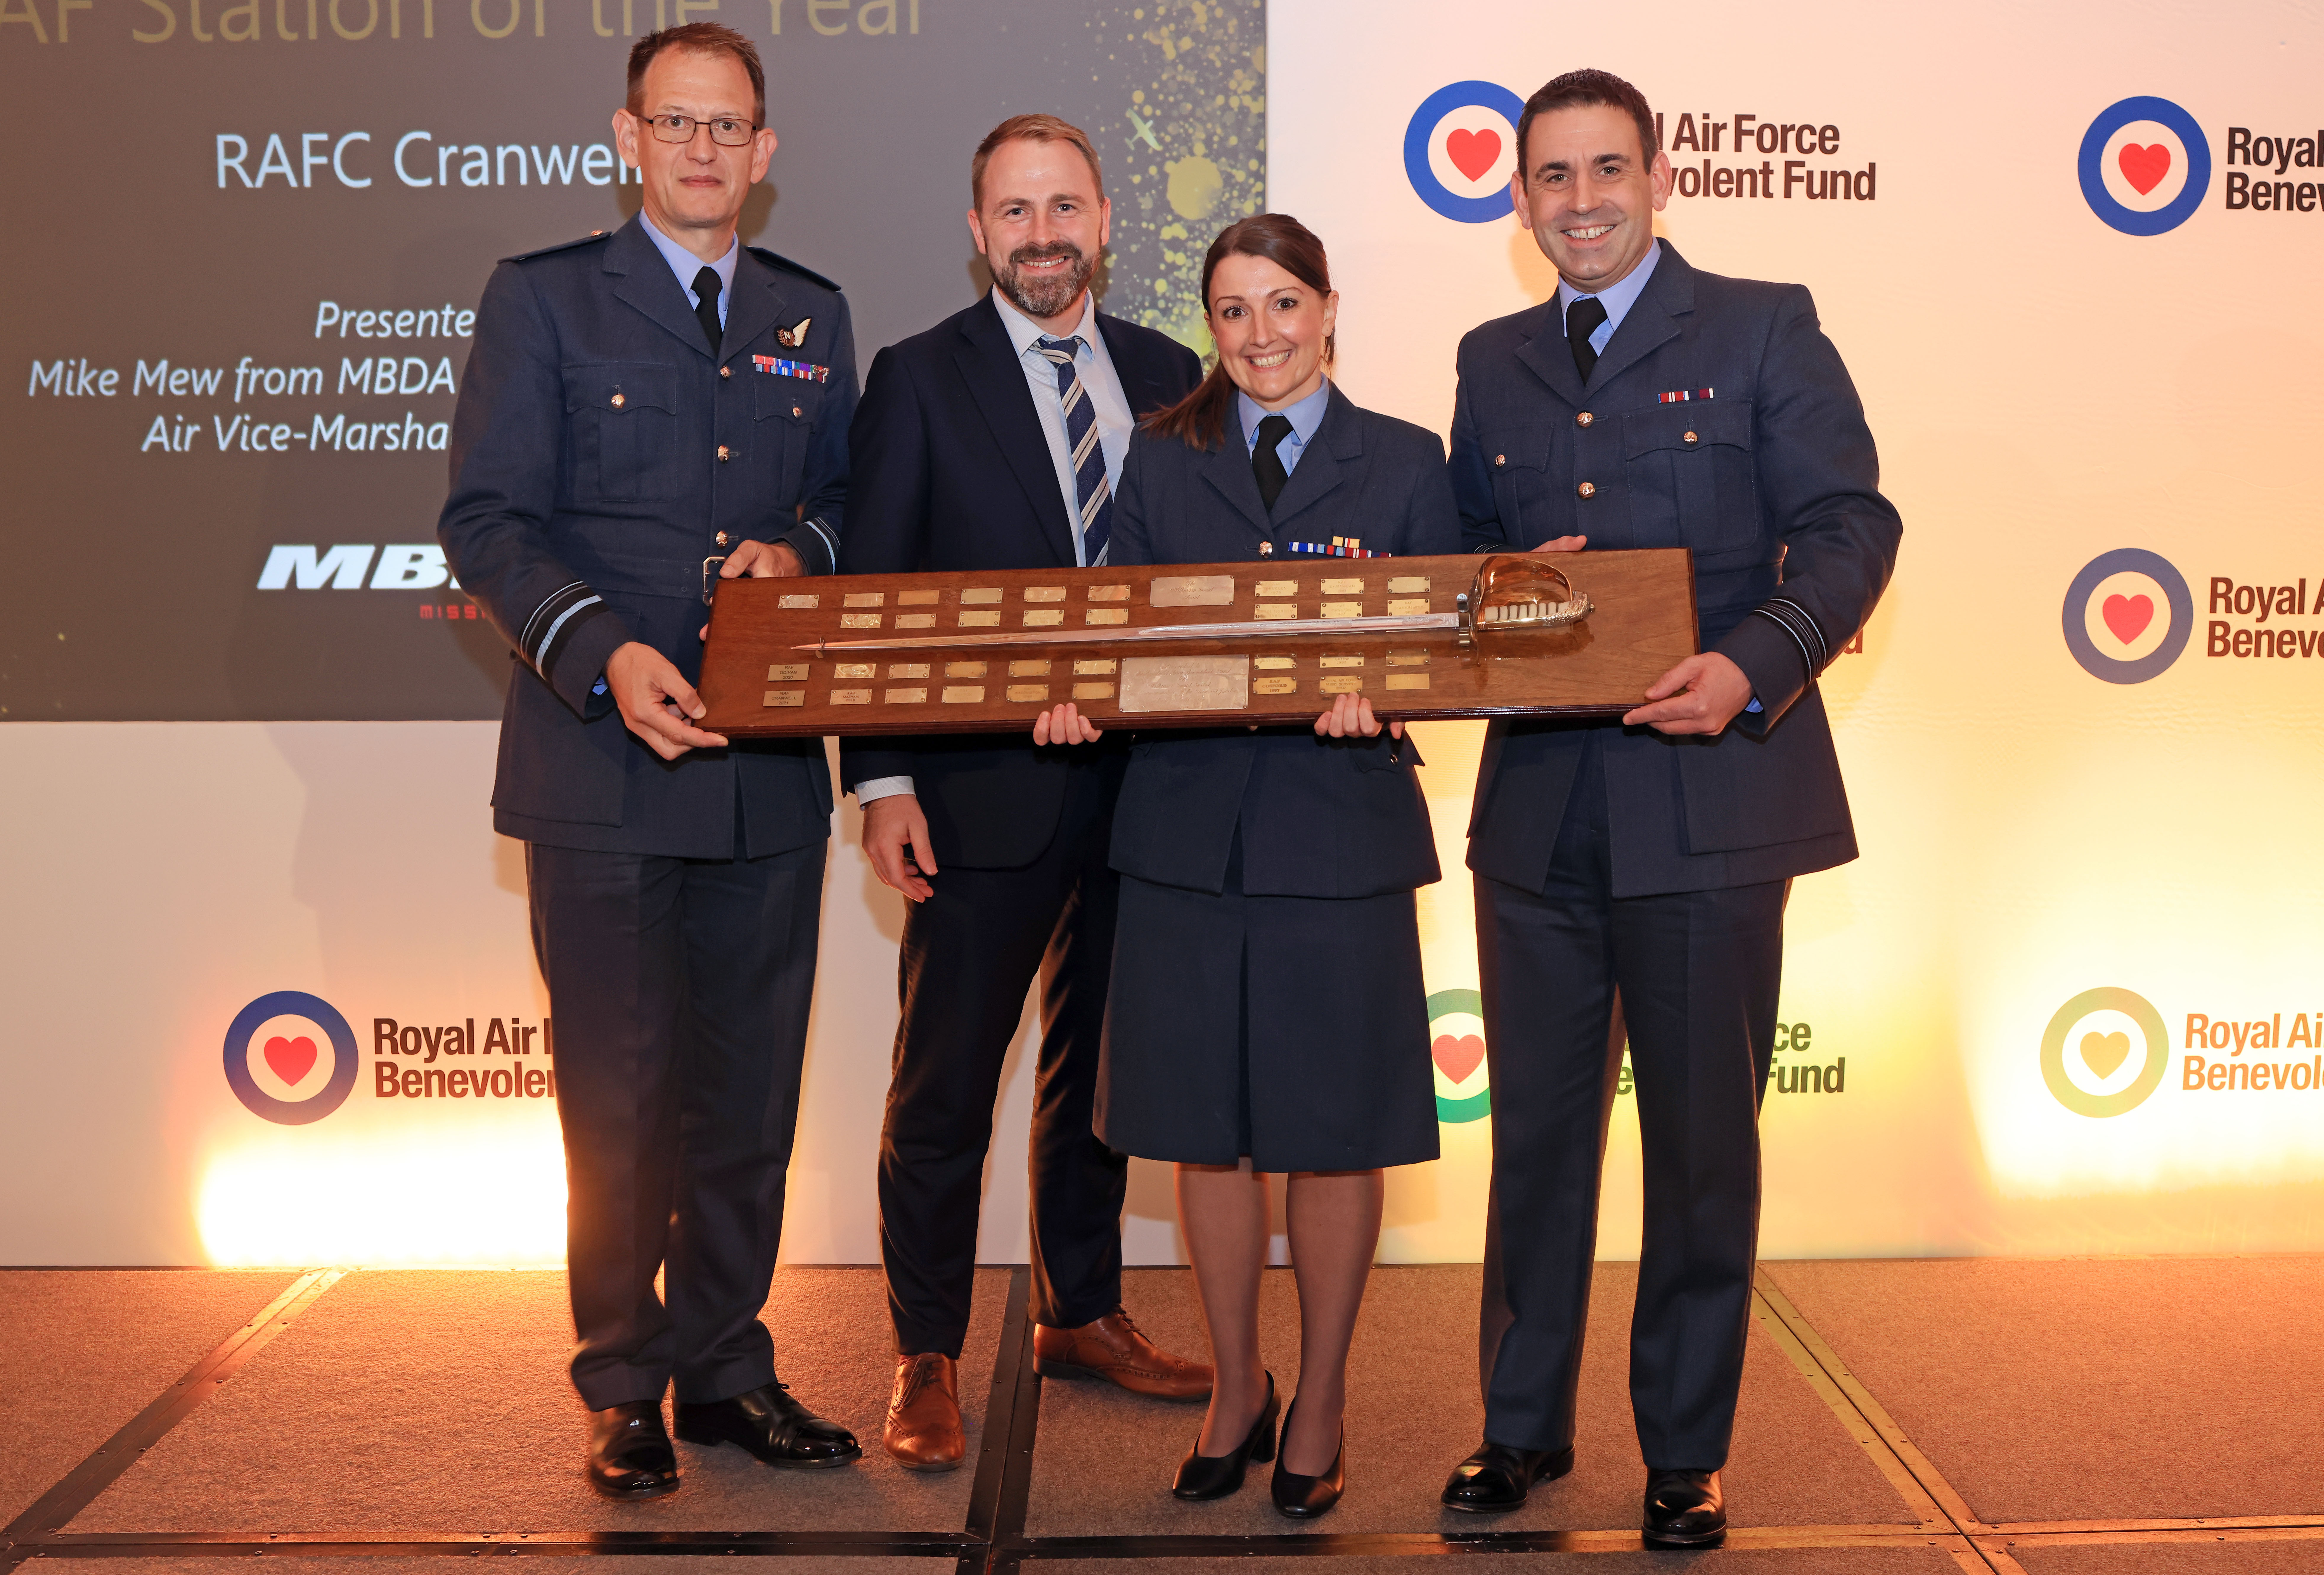 Personnel hold their award; a sword on a plaque.